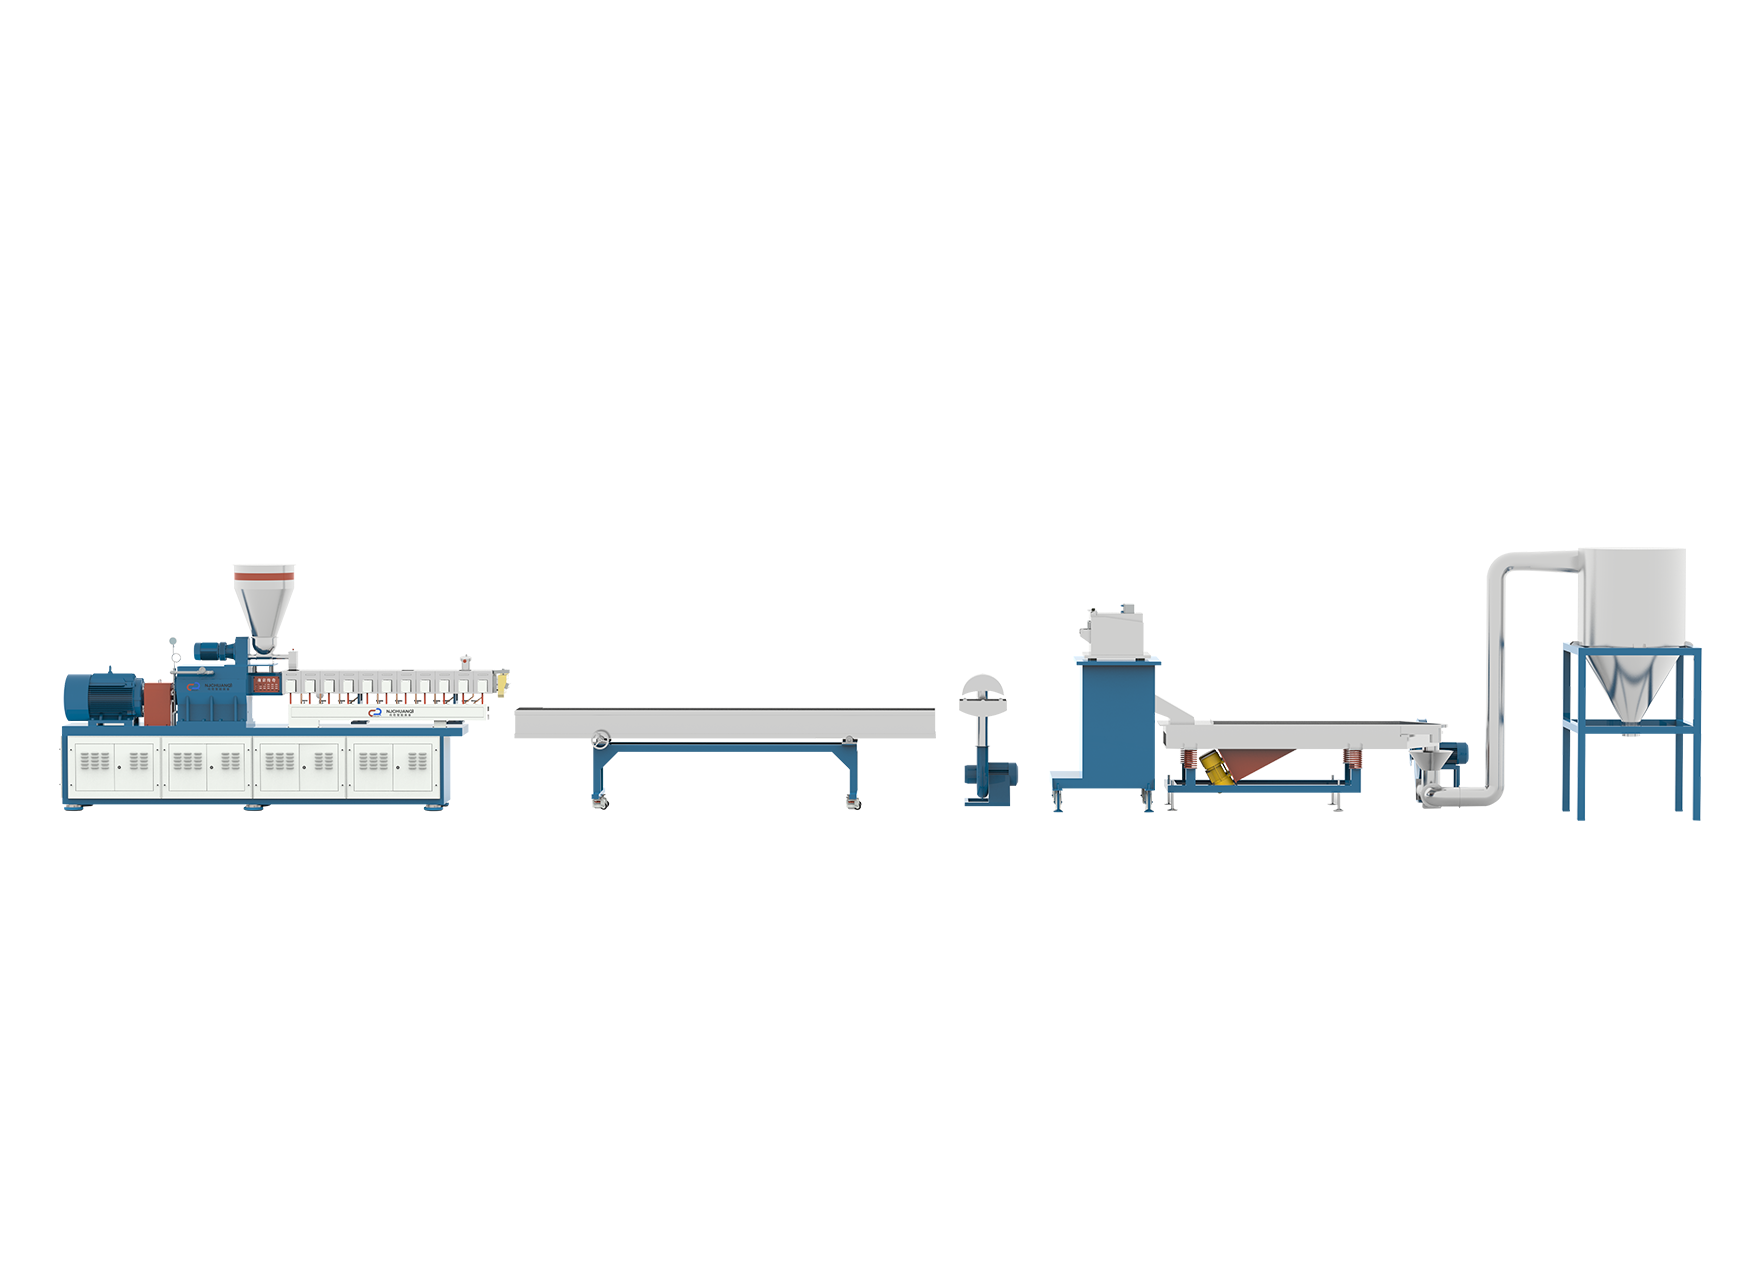 Twin Screw Water-cooled Pelletizing System